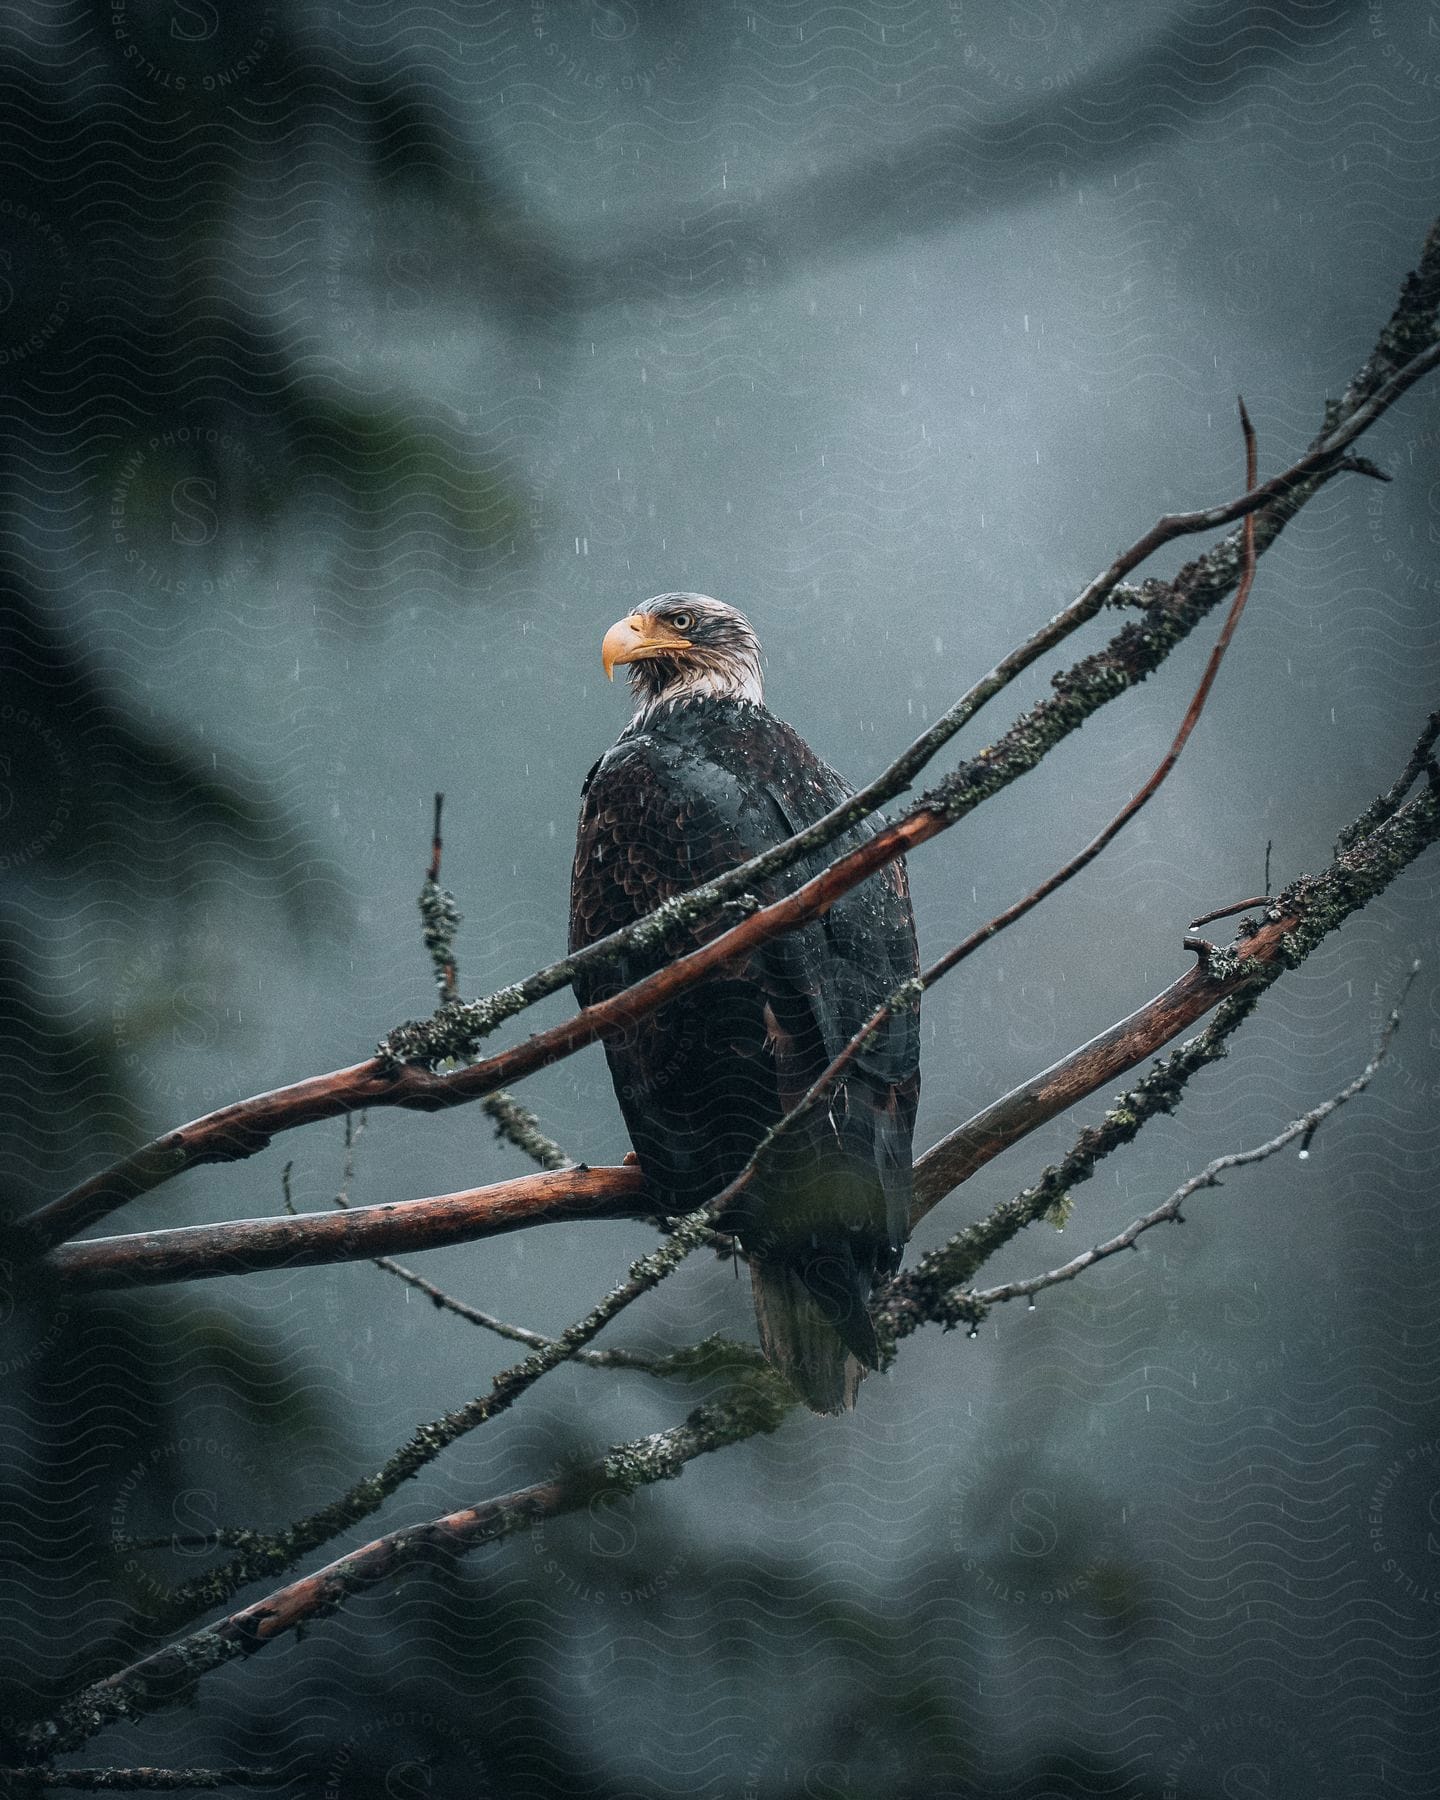 An eagle perches on a tree branch as snow falls